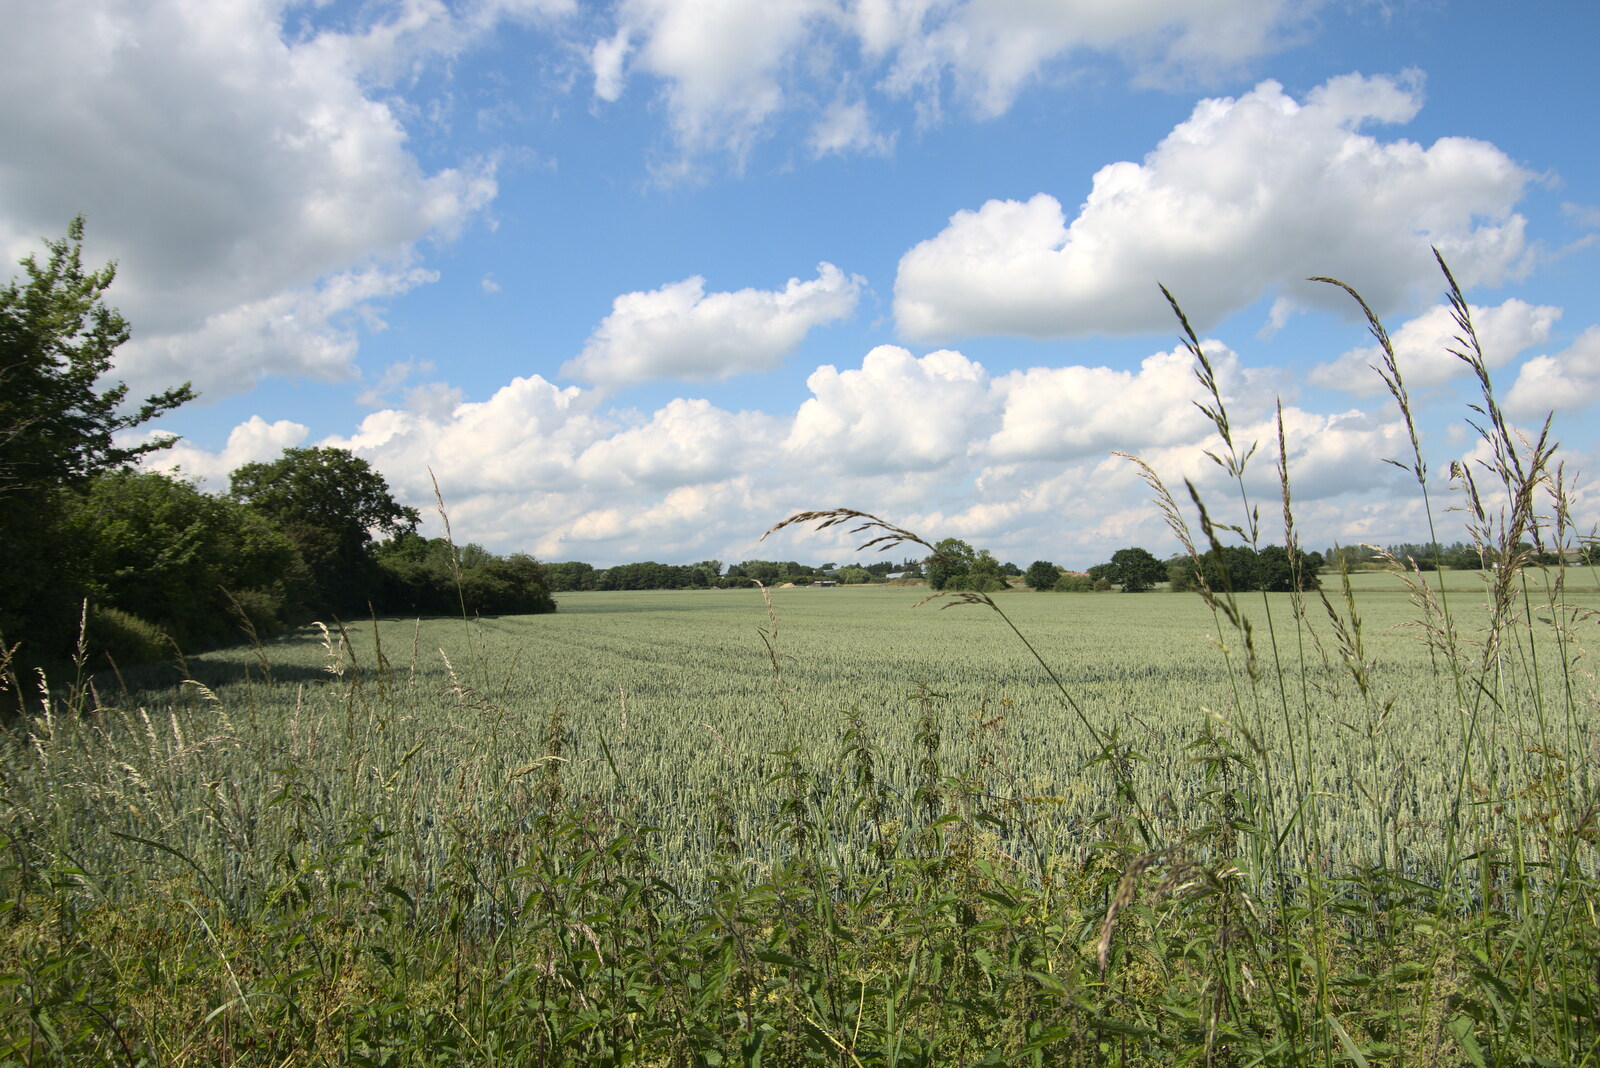 A field near Colin and Jill's from The BSCC at Earl Soham and at Colin and Jill's, Eye, Suffolk - 26th June 2021